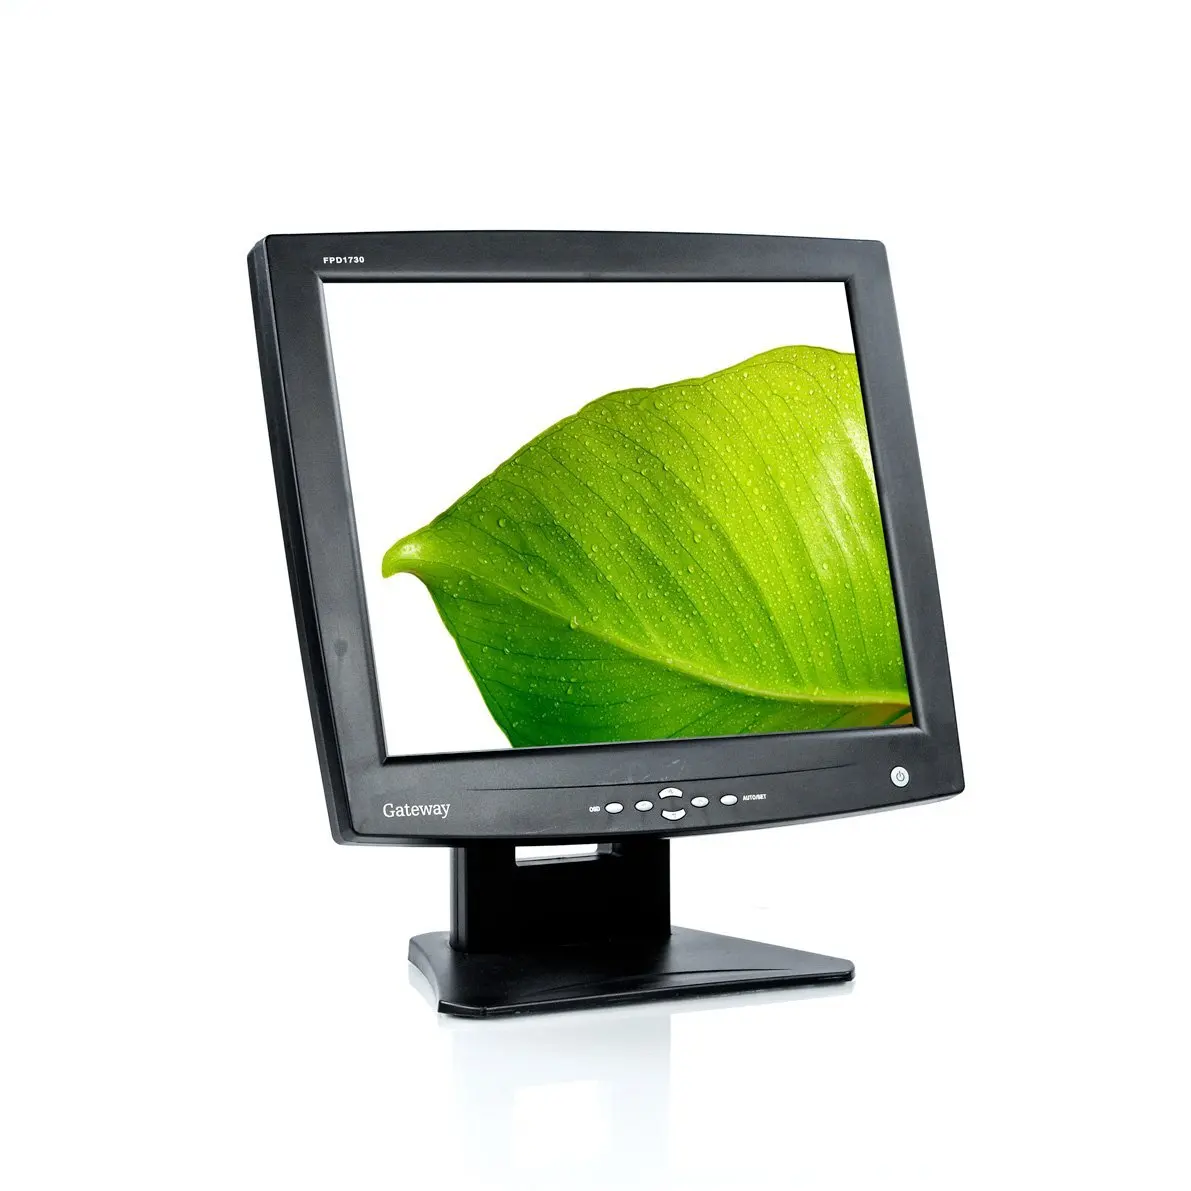 GATEWAY MONITOR FPD2275W DRIVER FOR WINDOWS DOWNLOAD